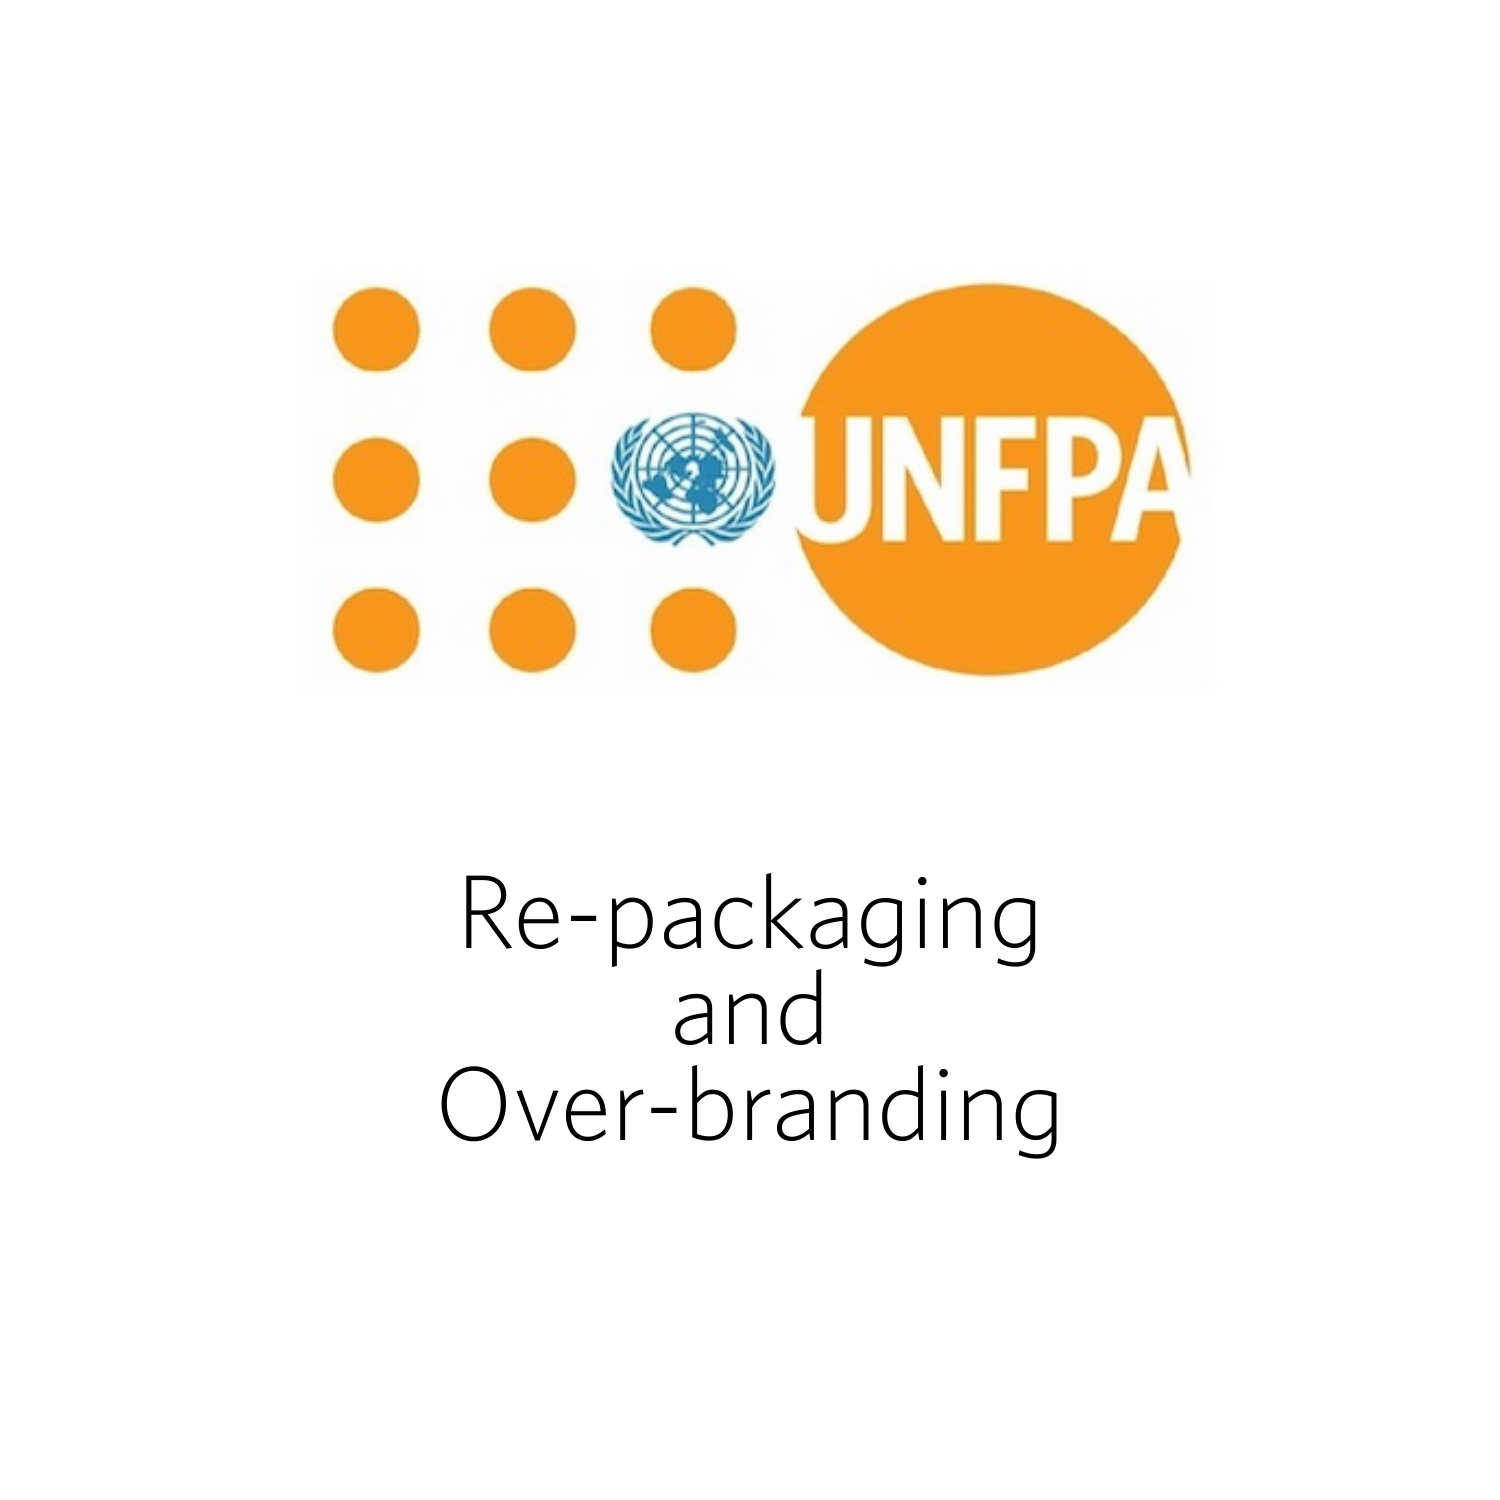 UNFPA Terms and conditions for re-packaging and over-branding